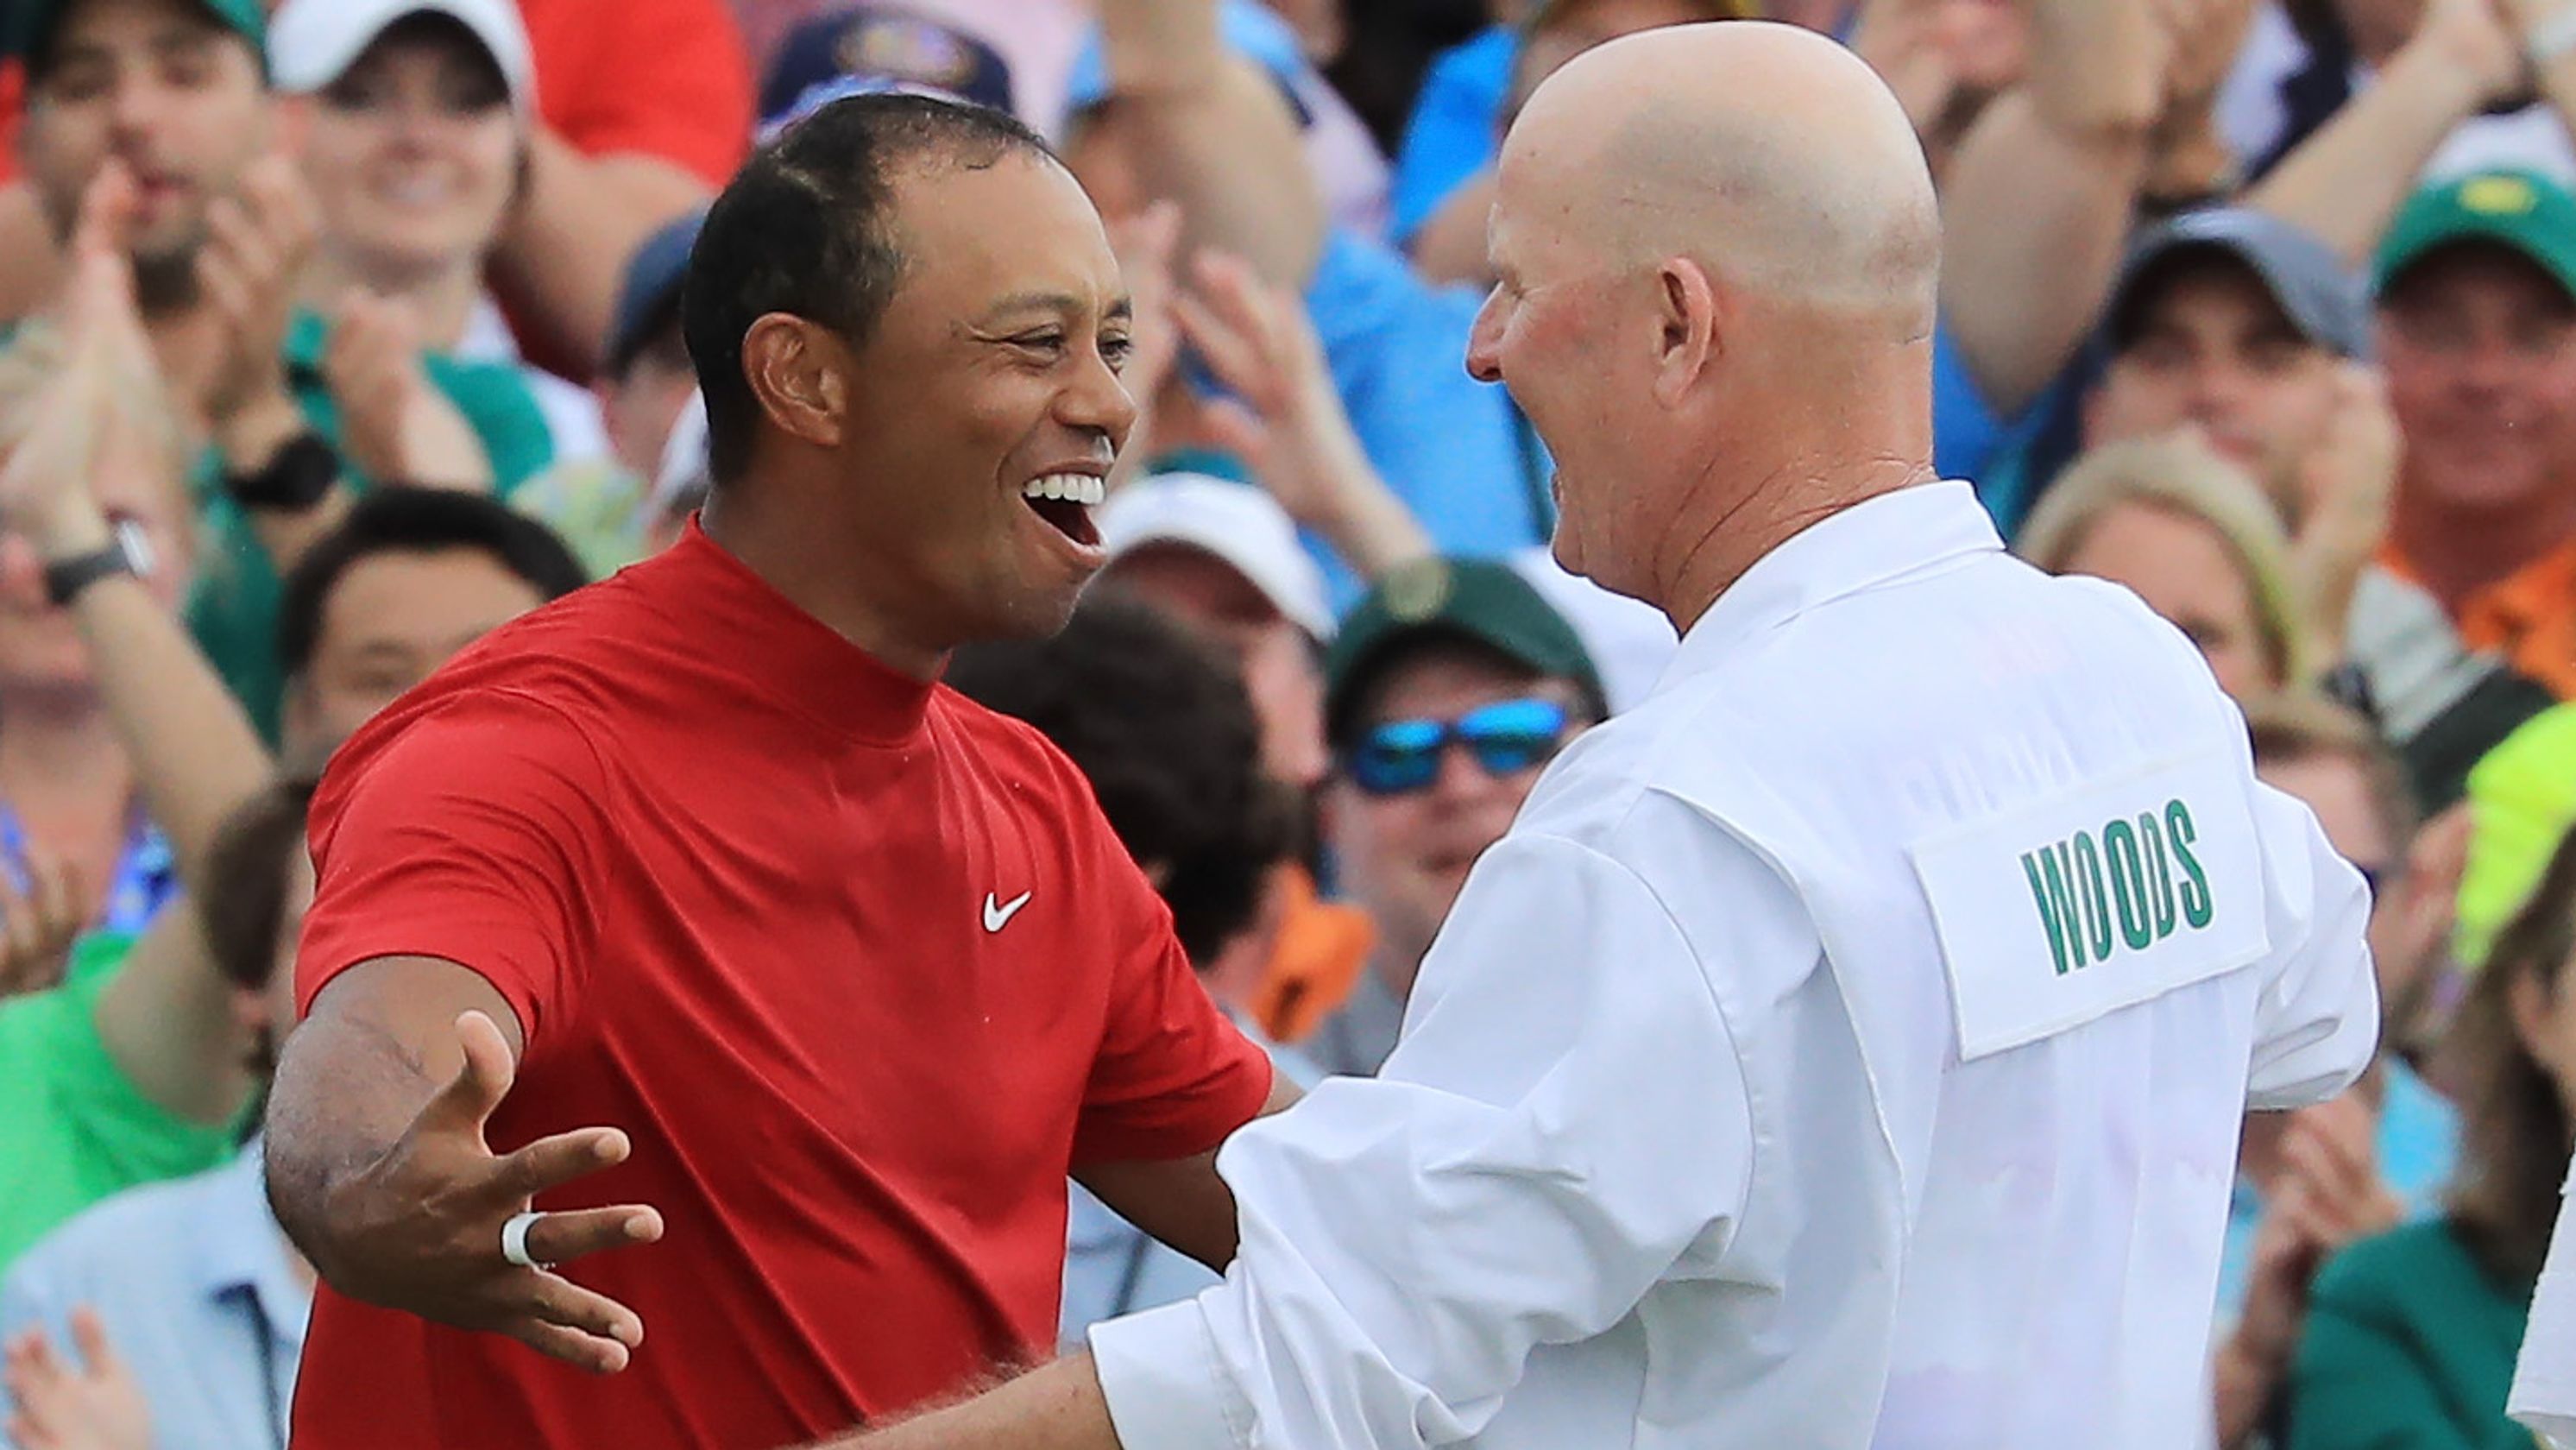 REVEALED! The text Tiger Woods sent Joe LaCava after winning Masters